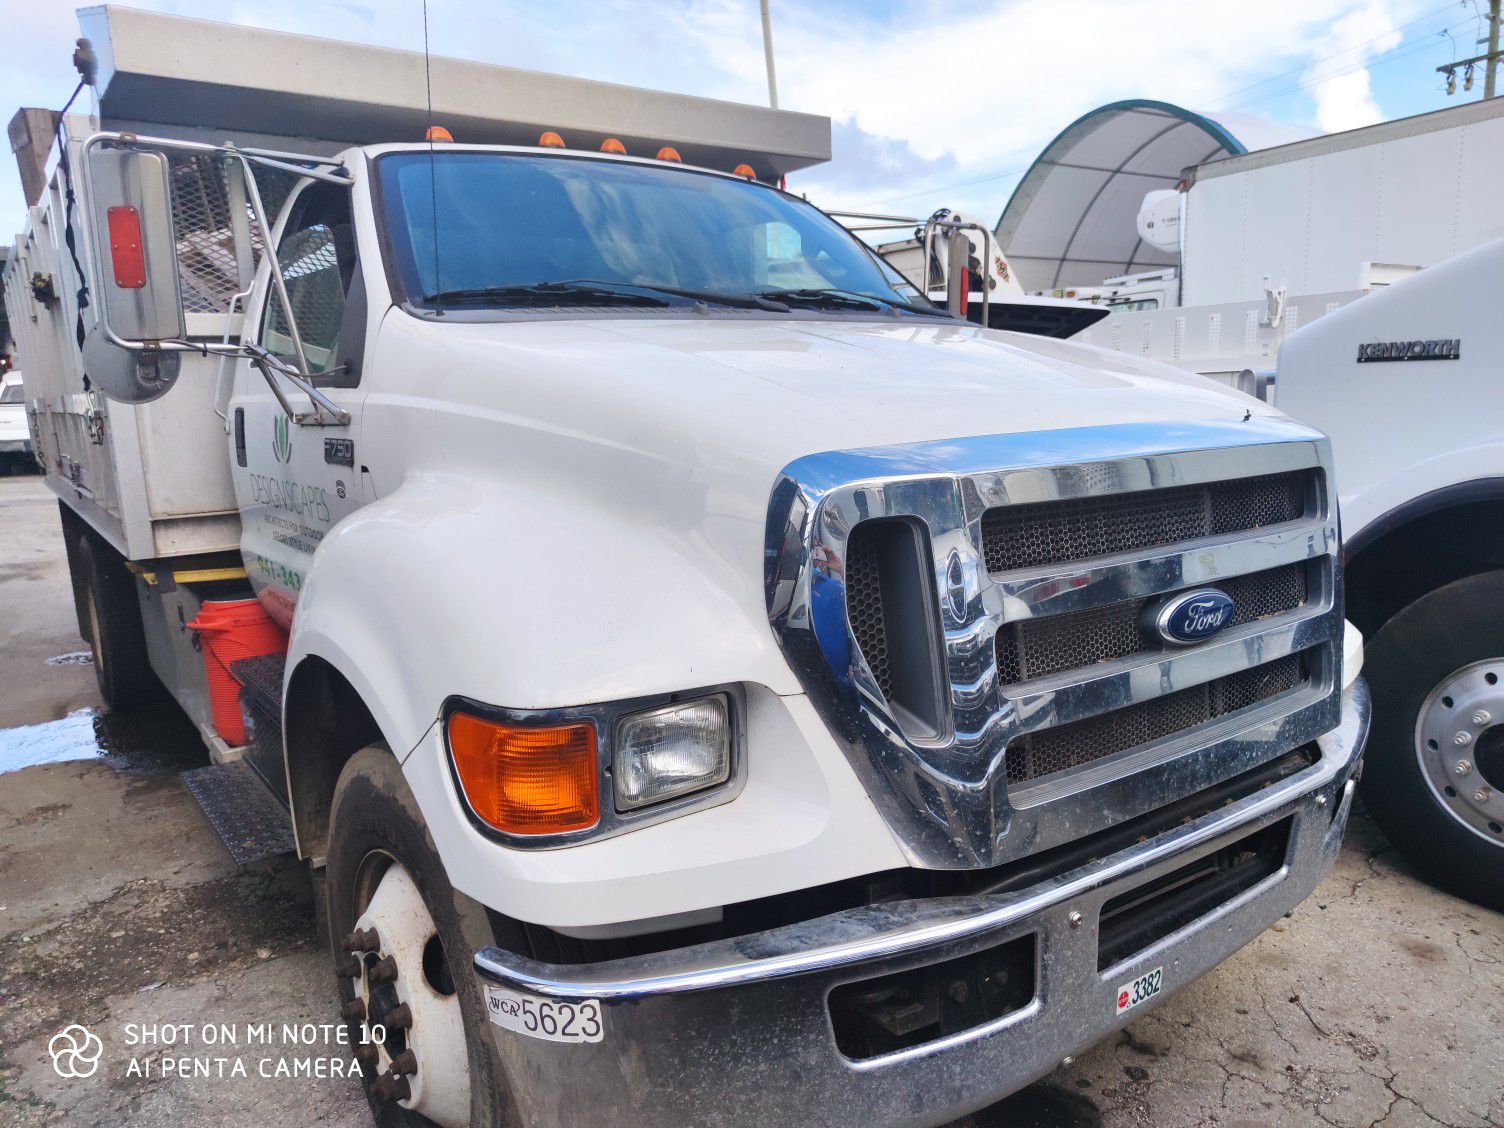 2015 FORD 750 SUPER DUTY 20FT ALLOY DUMP BED ONE OWNER ONLY 40K LIKE NEW CLEAN UNIT READY TO WORK NEED FINANCING CONTACT OLIVER 305TRUCKGURU